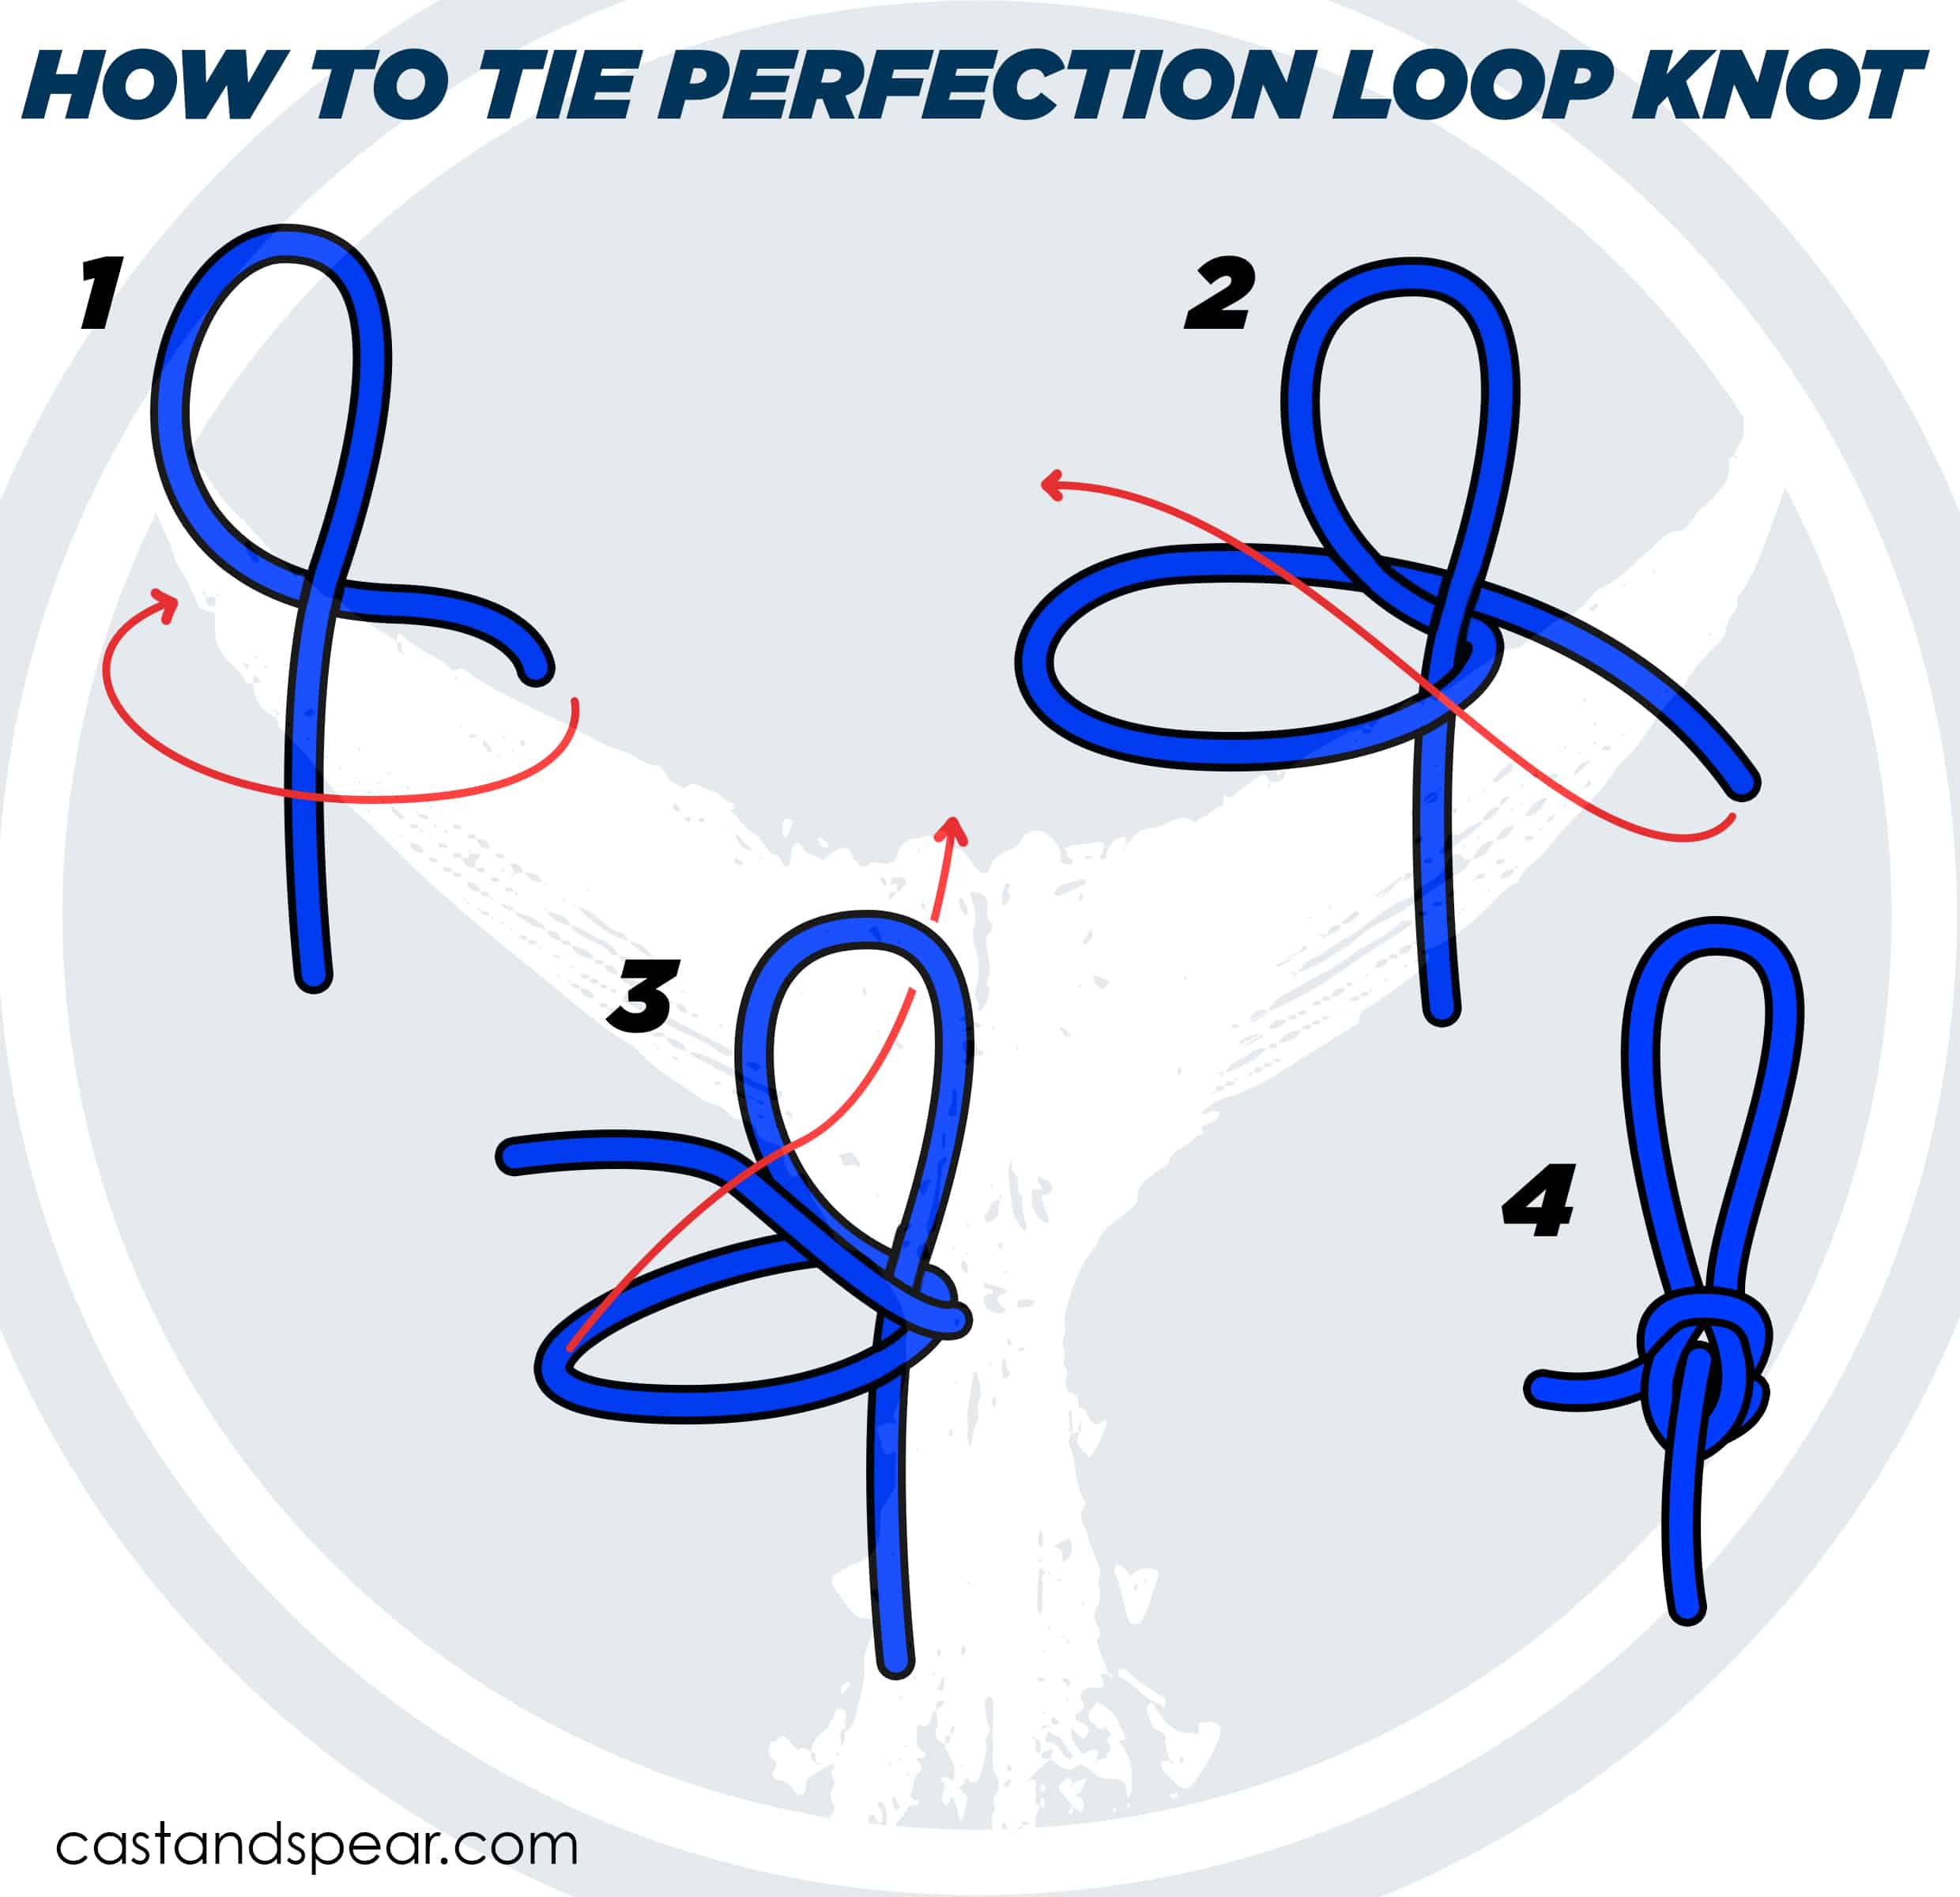 How to Tie a Perfection Loop Knot